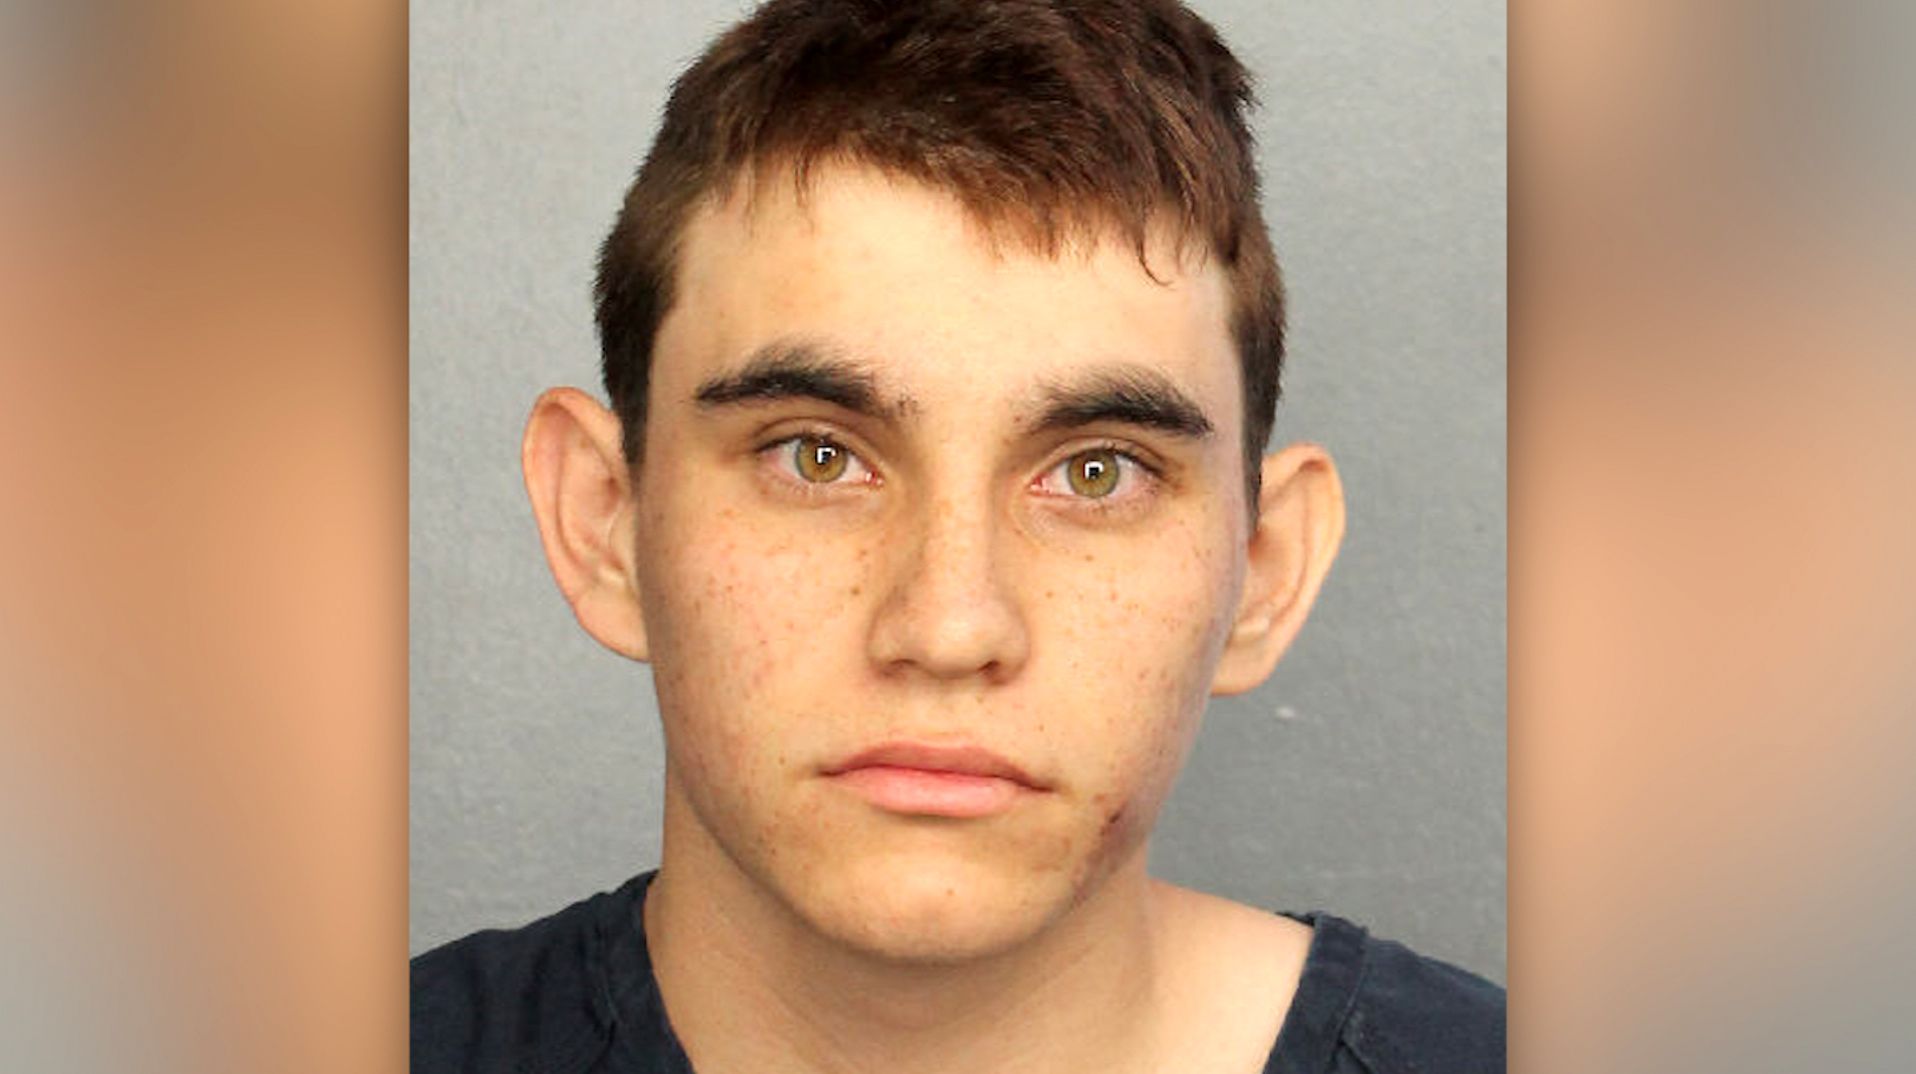 Torments Niks Indian More Videos - From 'broken child' to mass killer at Florida school | CNN